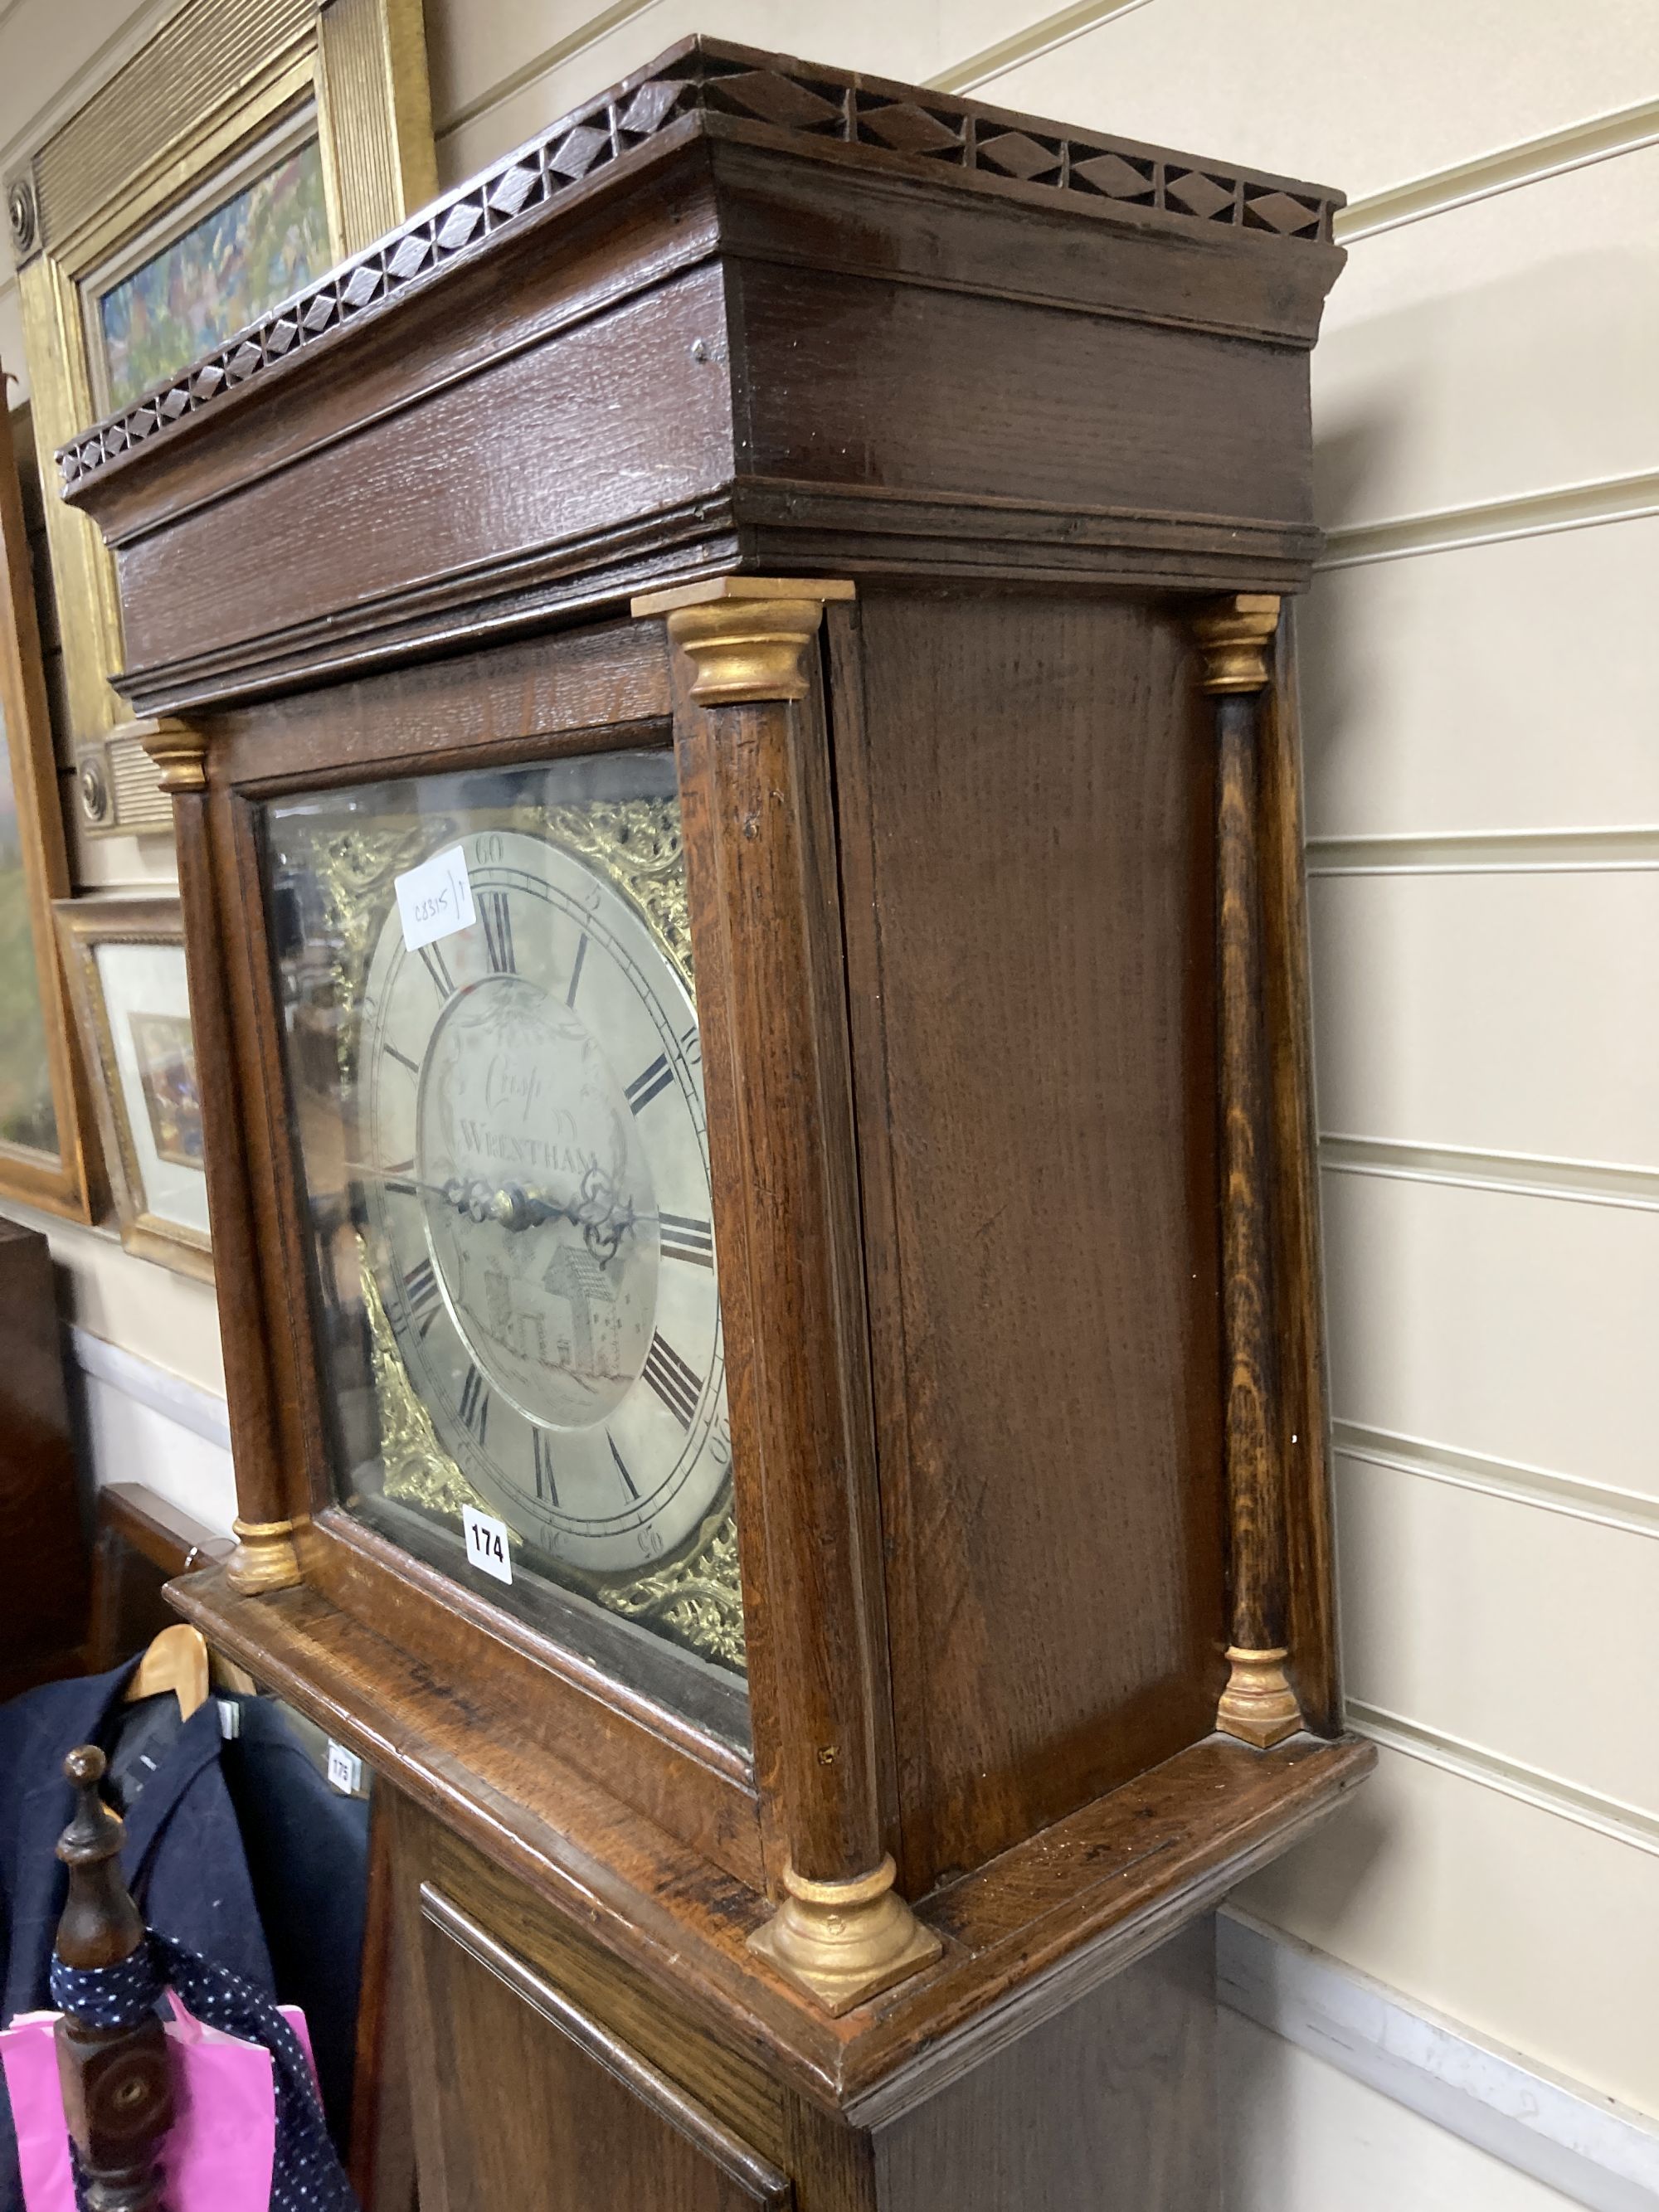 A late 18th century thirty hour longcase clock movement by Crisp - Wrentham in later oak case, height 190cm